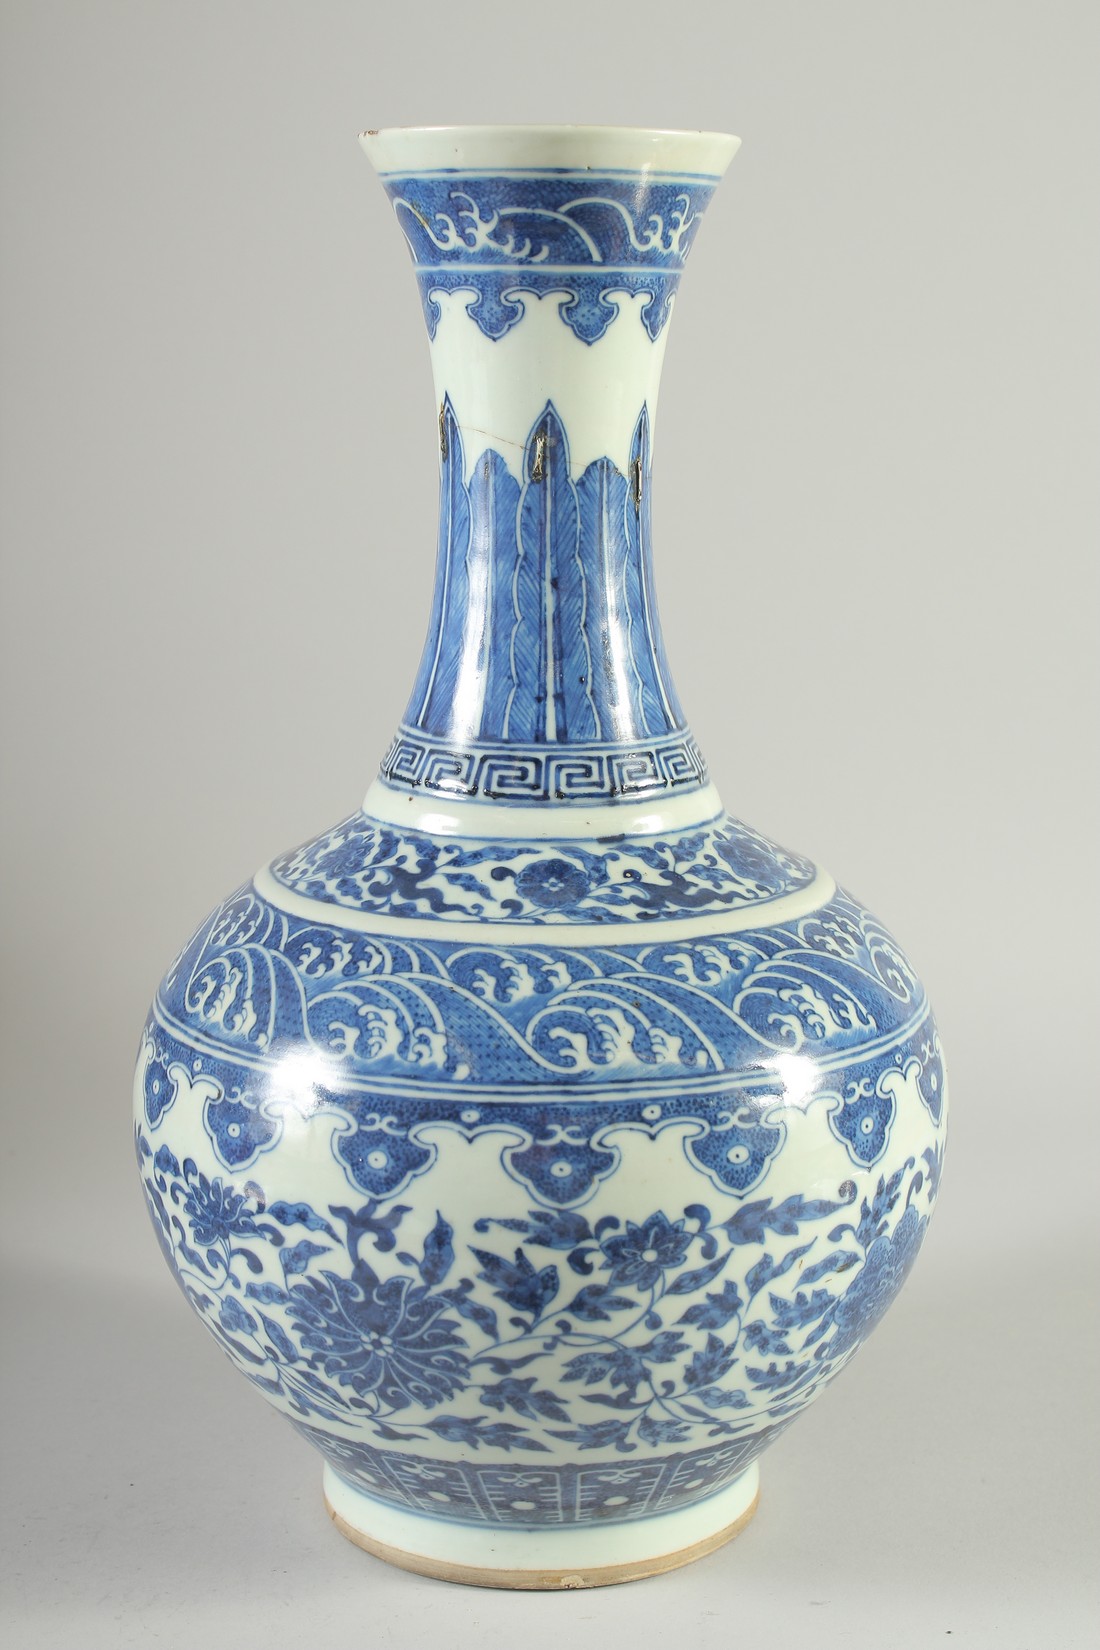 A LARGE 19TH CENTURY CHINESE BLUE AND WHITE PORCELAIN VASE, painted with bands of floral motifs with - Image 4 of 7